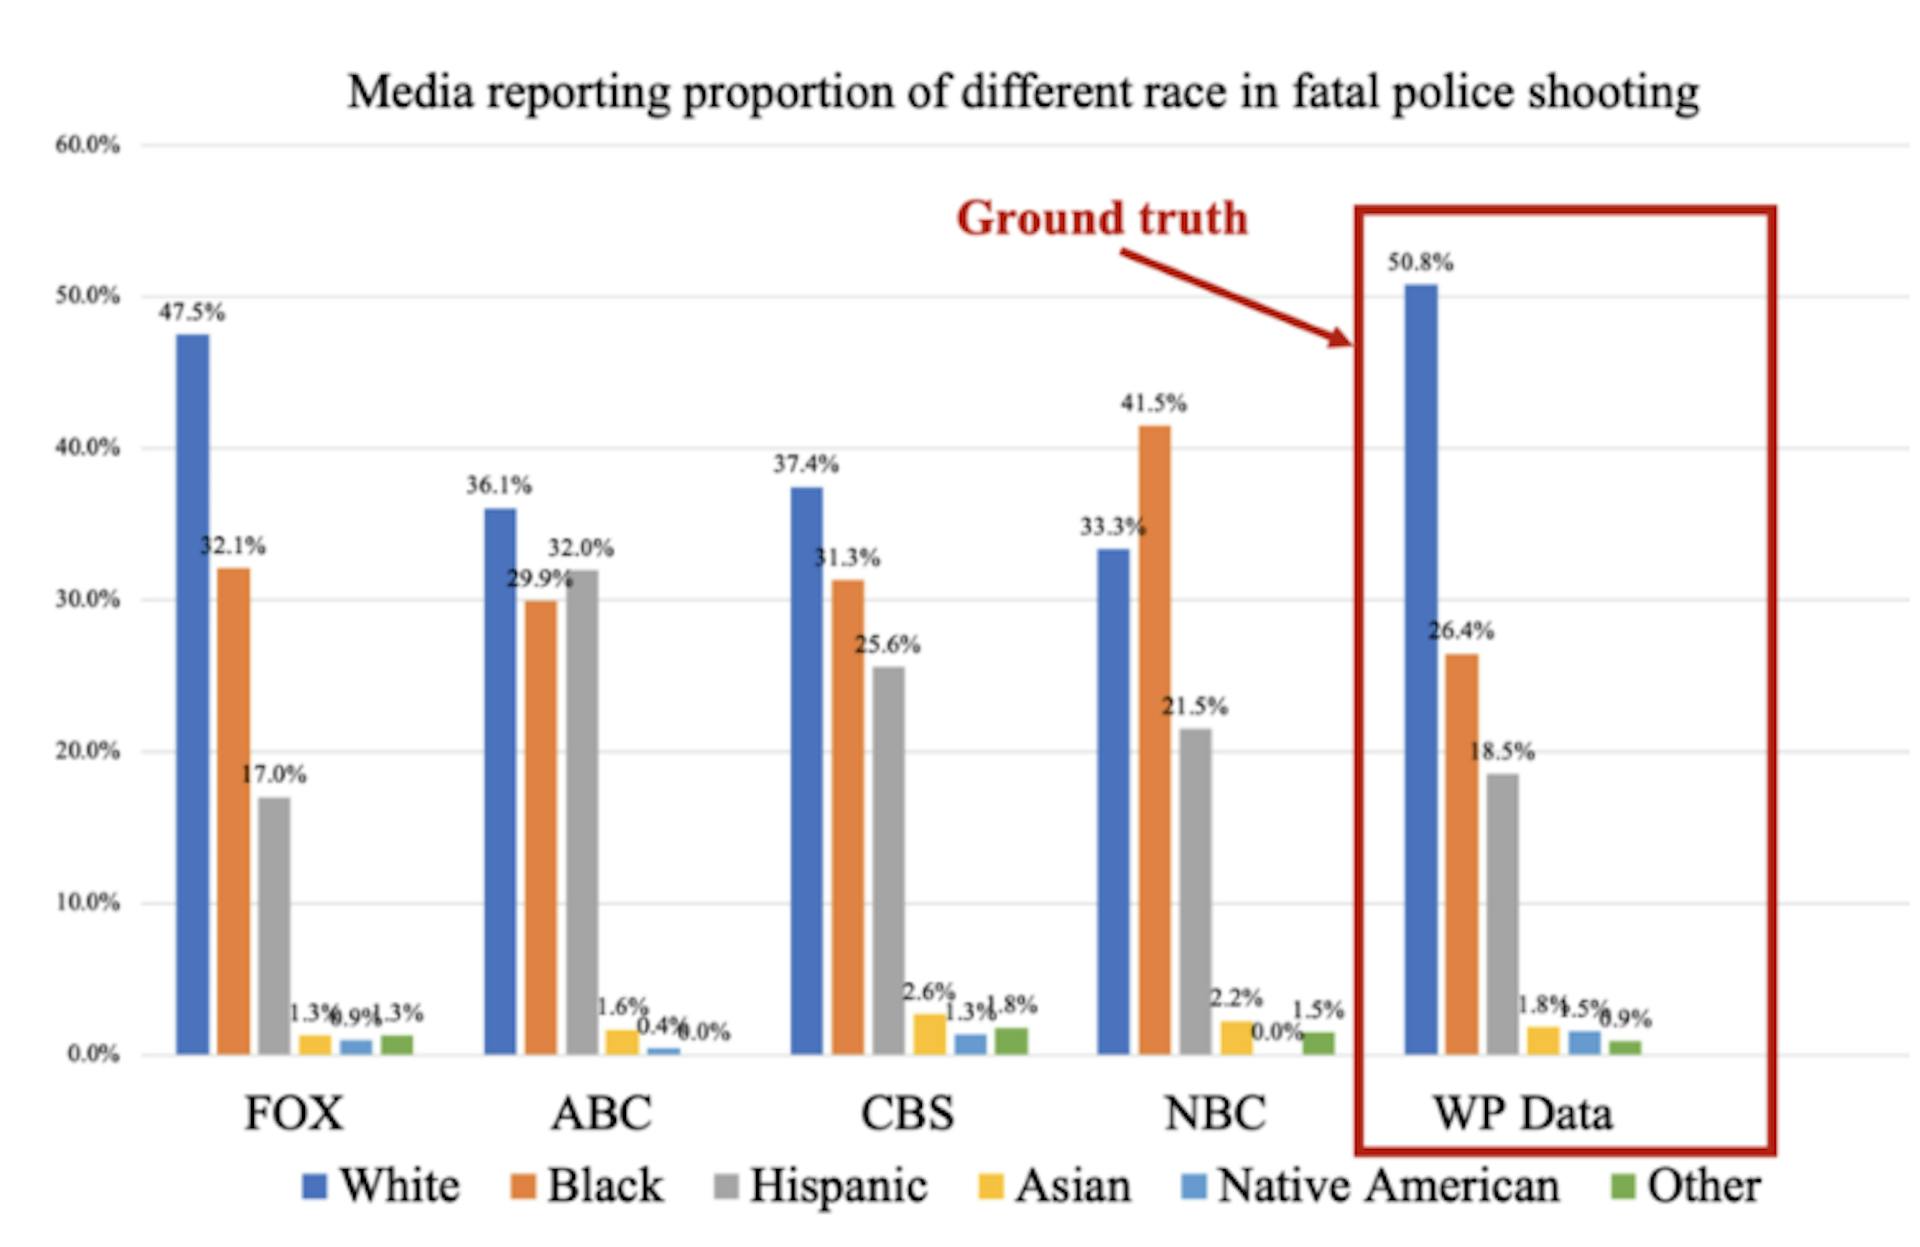 Figure 5. Media reporting proportion of police shooting by different race